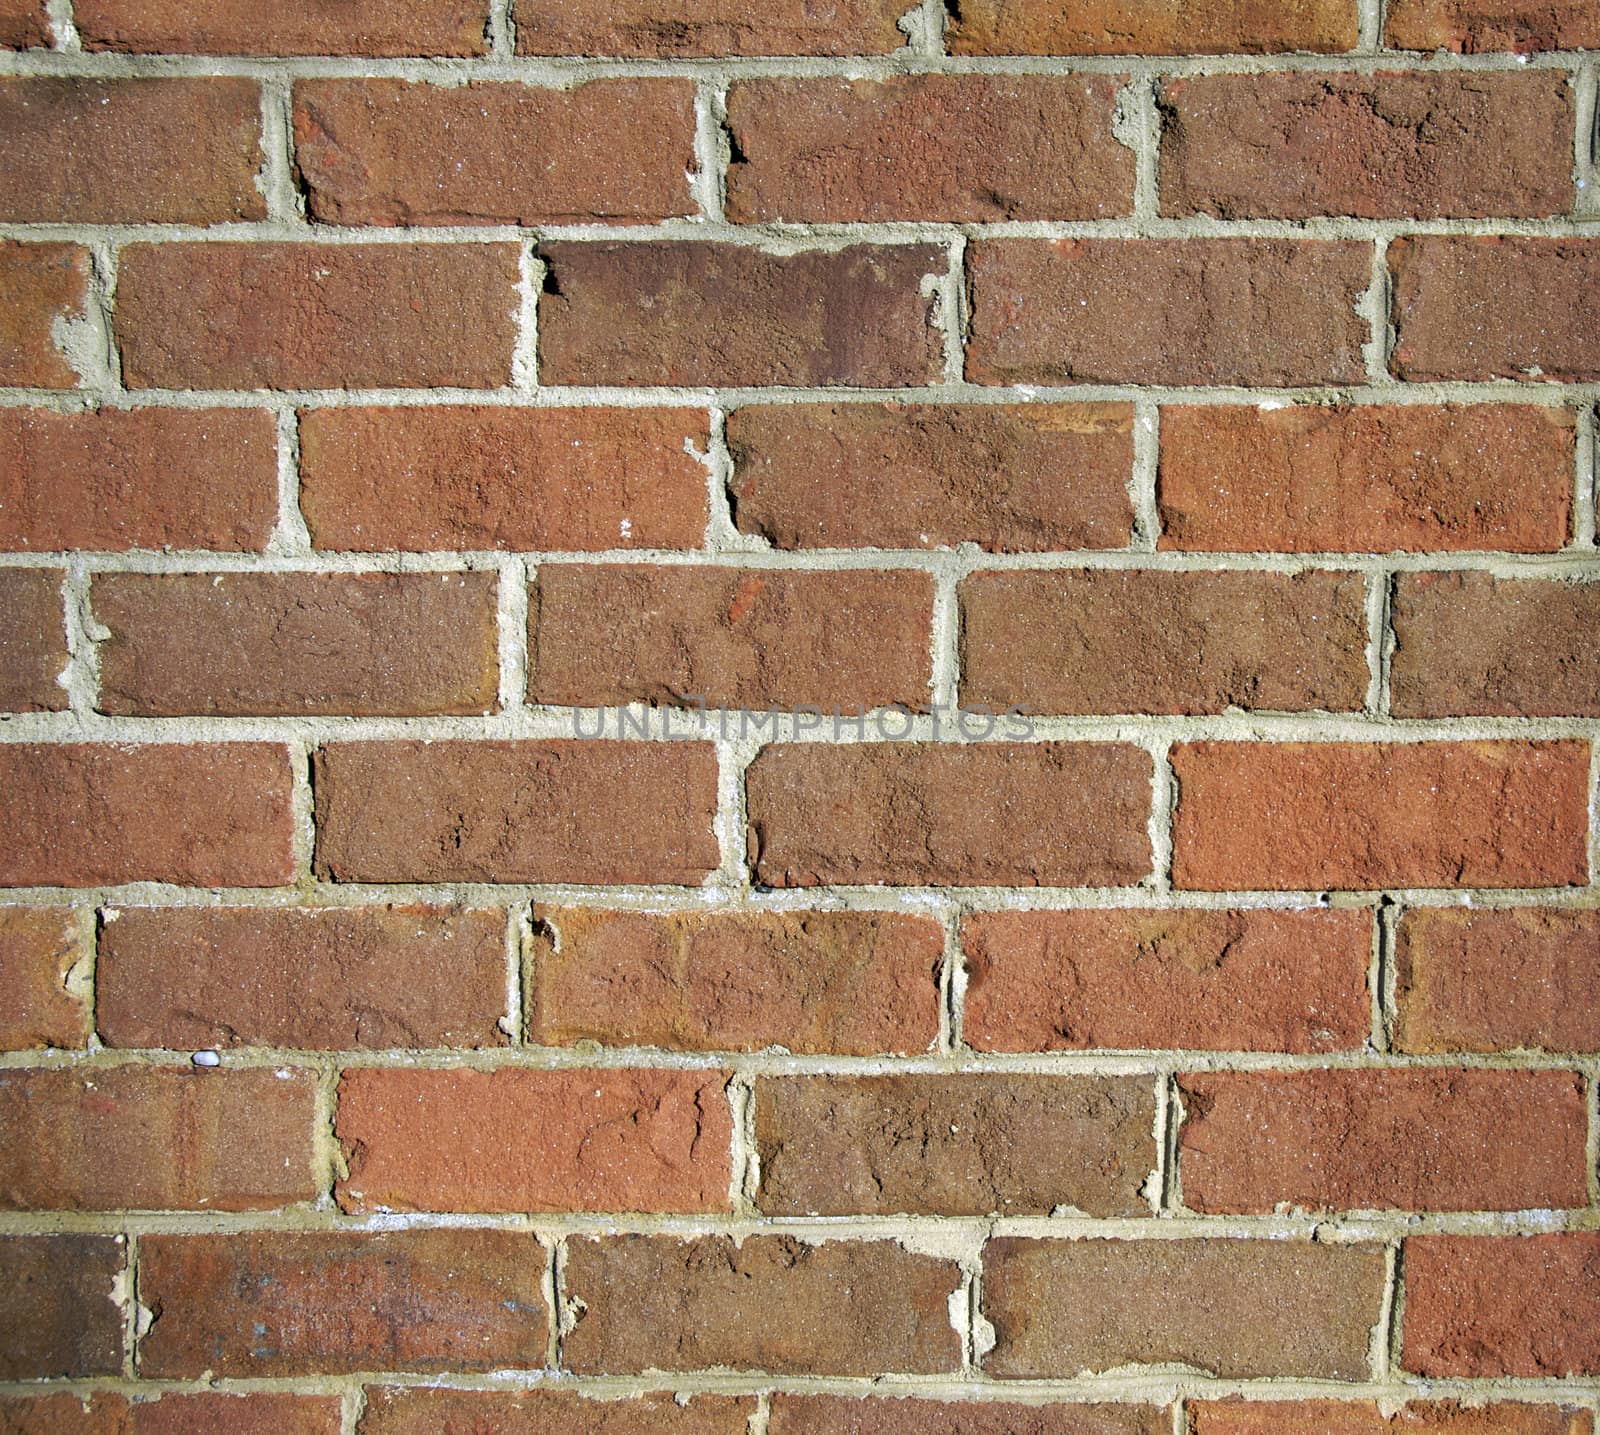 Brick wall with mortar by npologuy